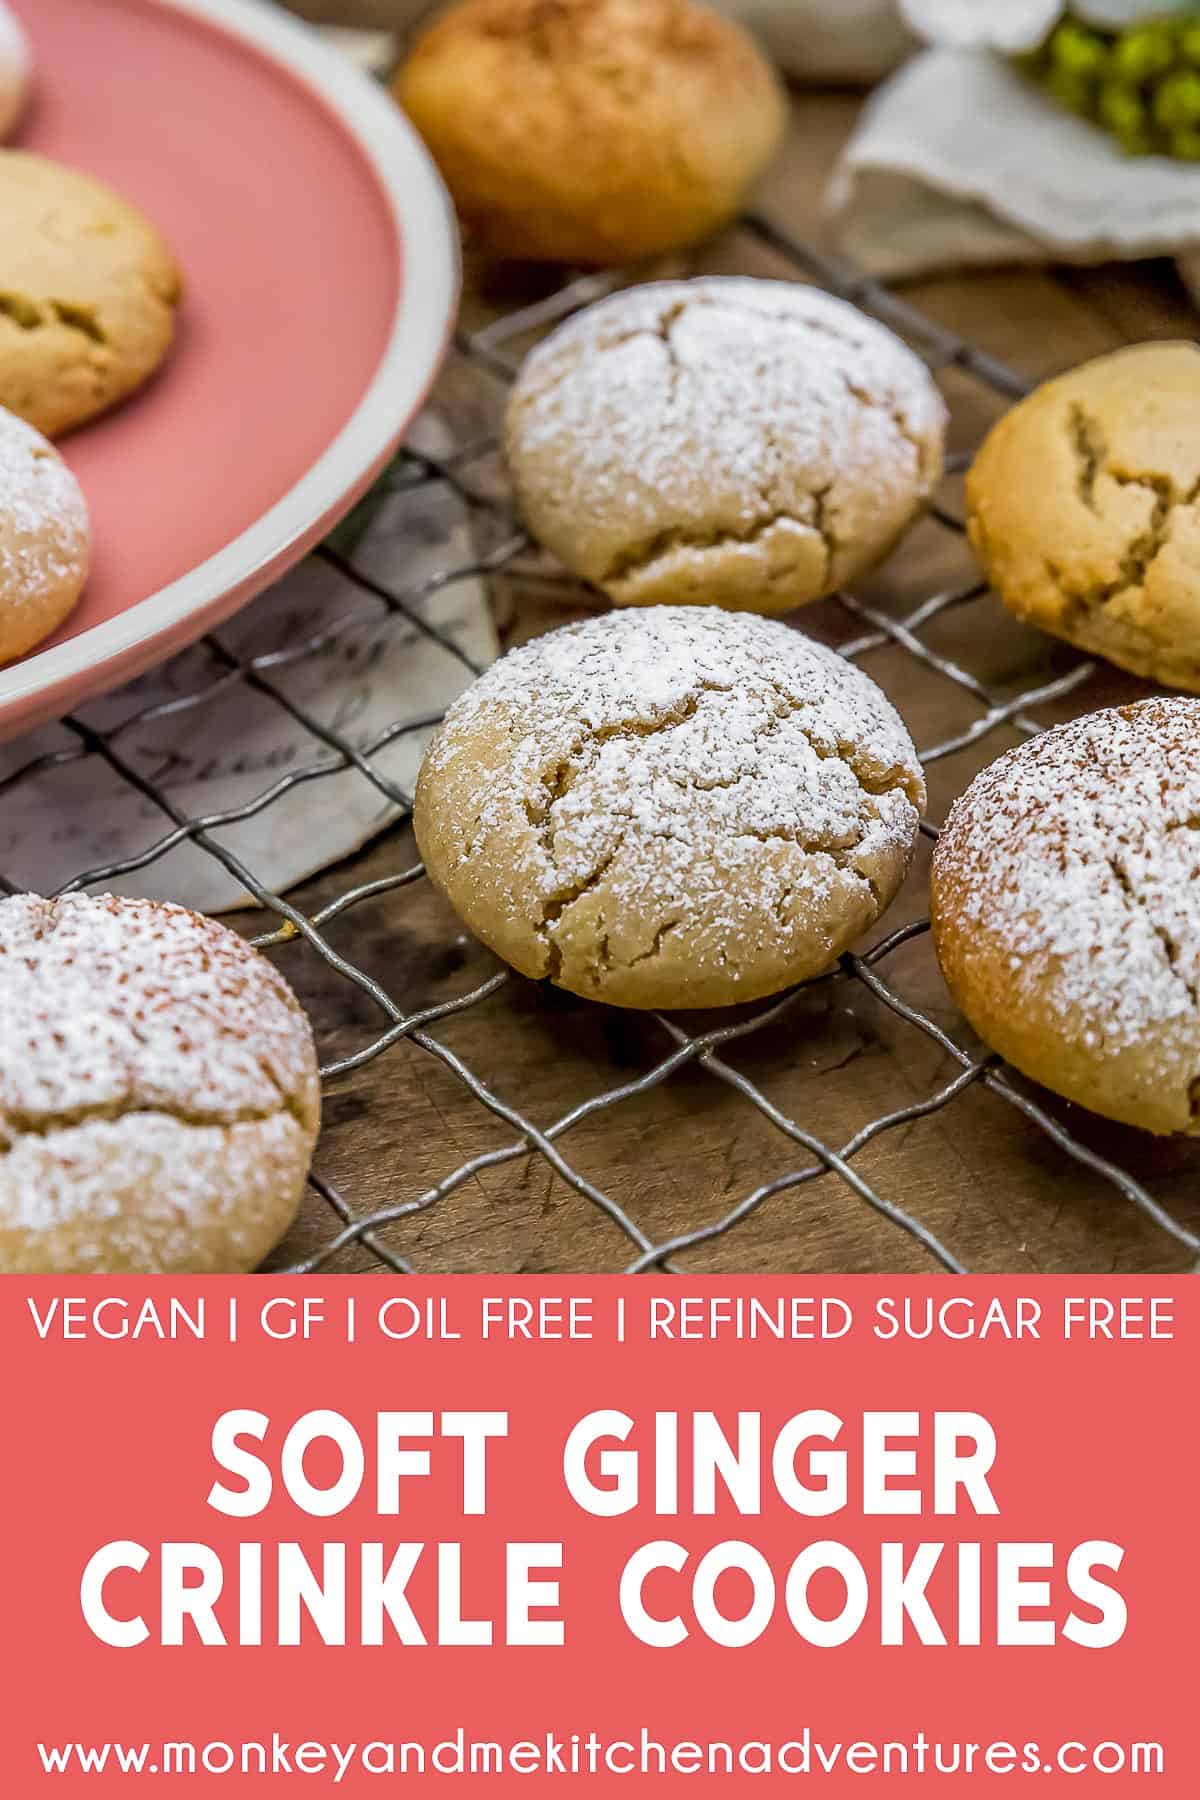 Soft Ginger Crinkle Cookies with text description